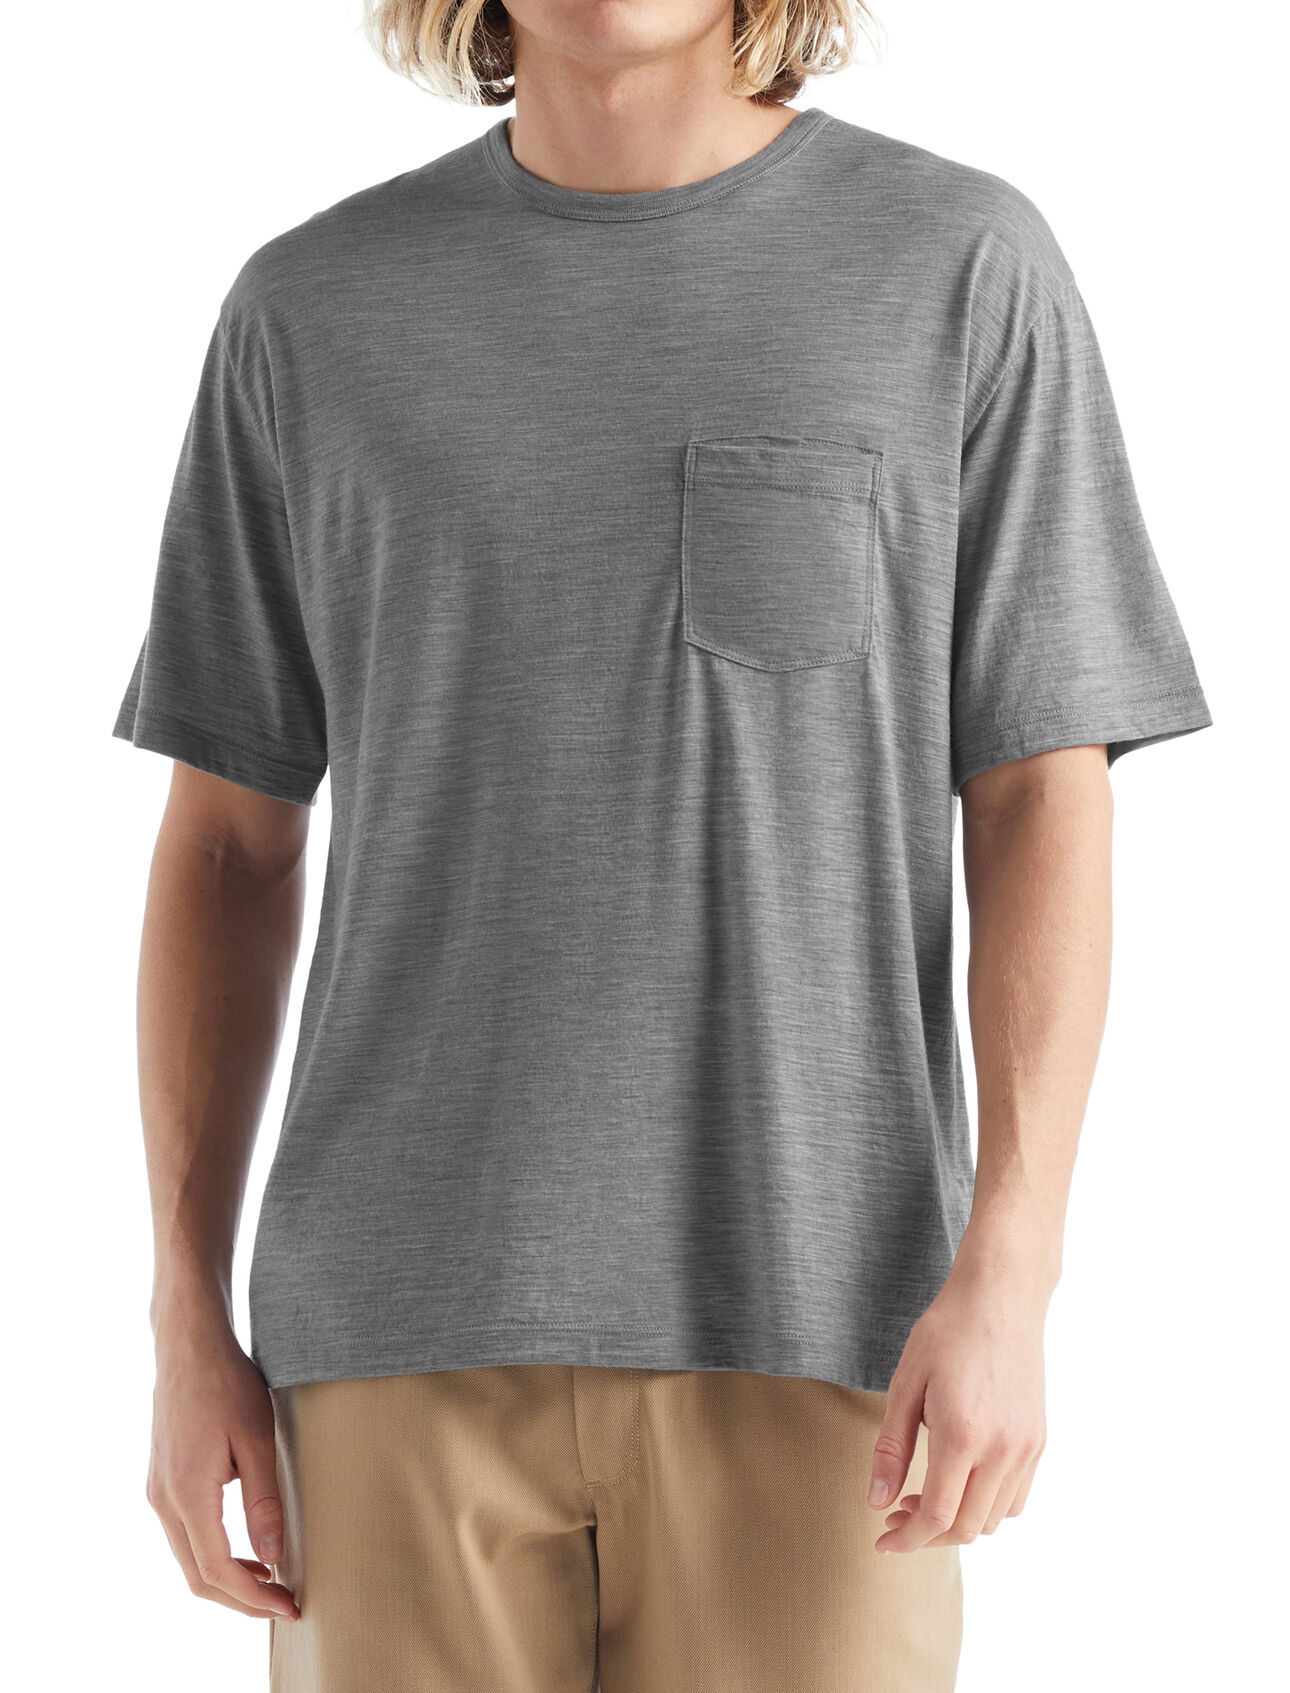 dla mężczyzn Merino Granary Short Sleeve Pocket T-Shirt A classic pocket tee with a relaxed fit and soft, breathable, 100% merino wool fabric, the Granary Short Sleeve Pocket Tee is all about everyday comfort and style.